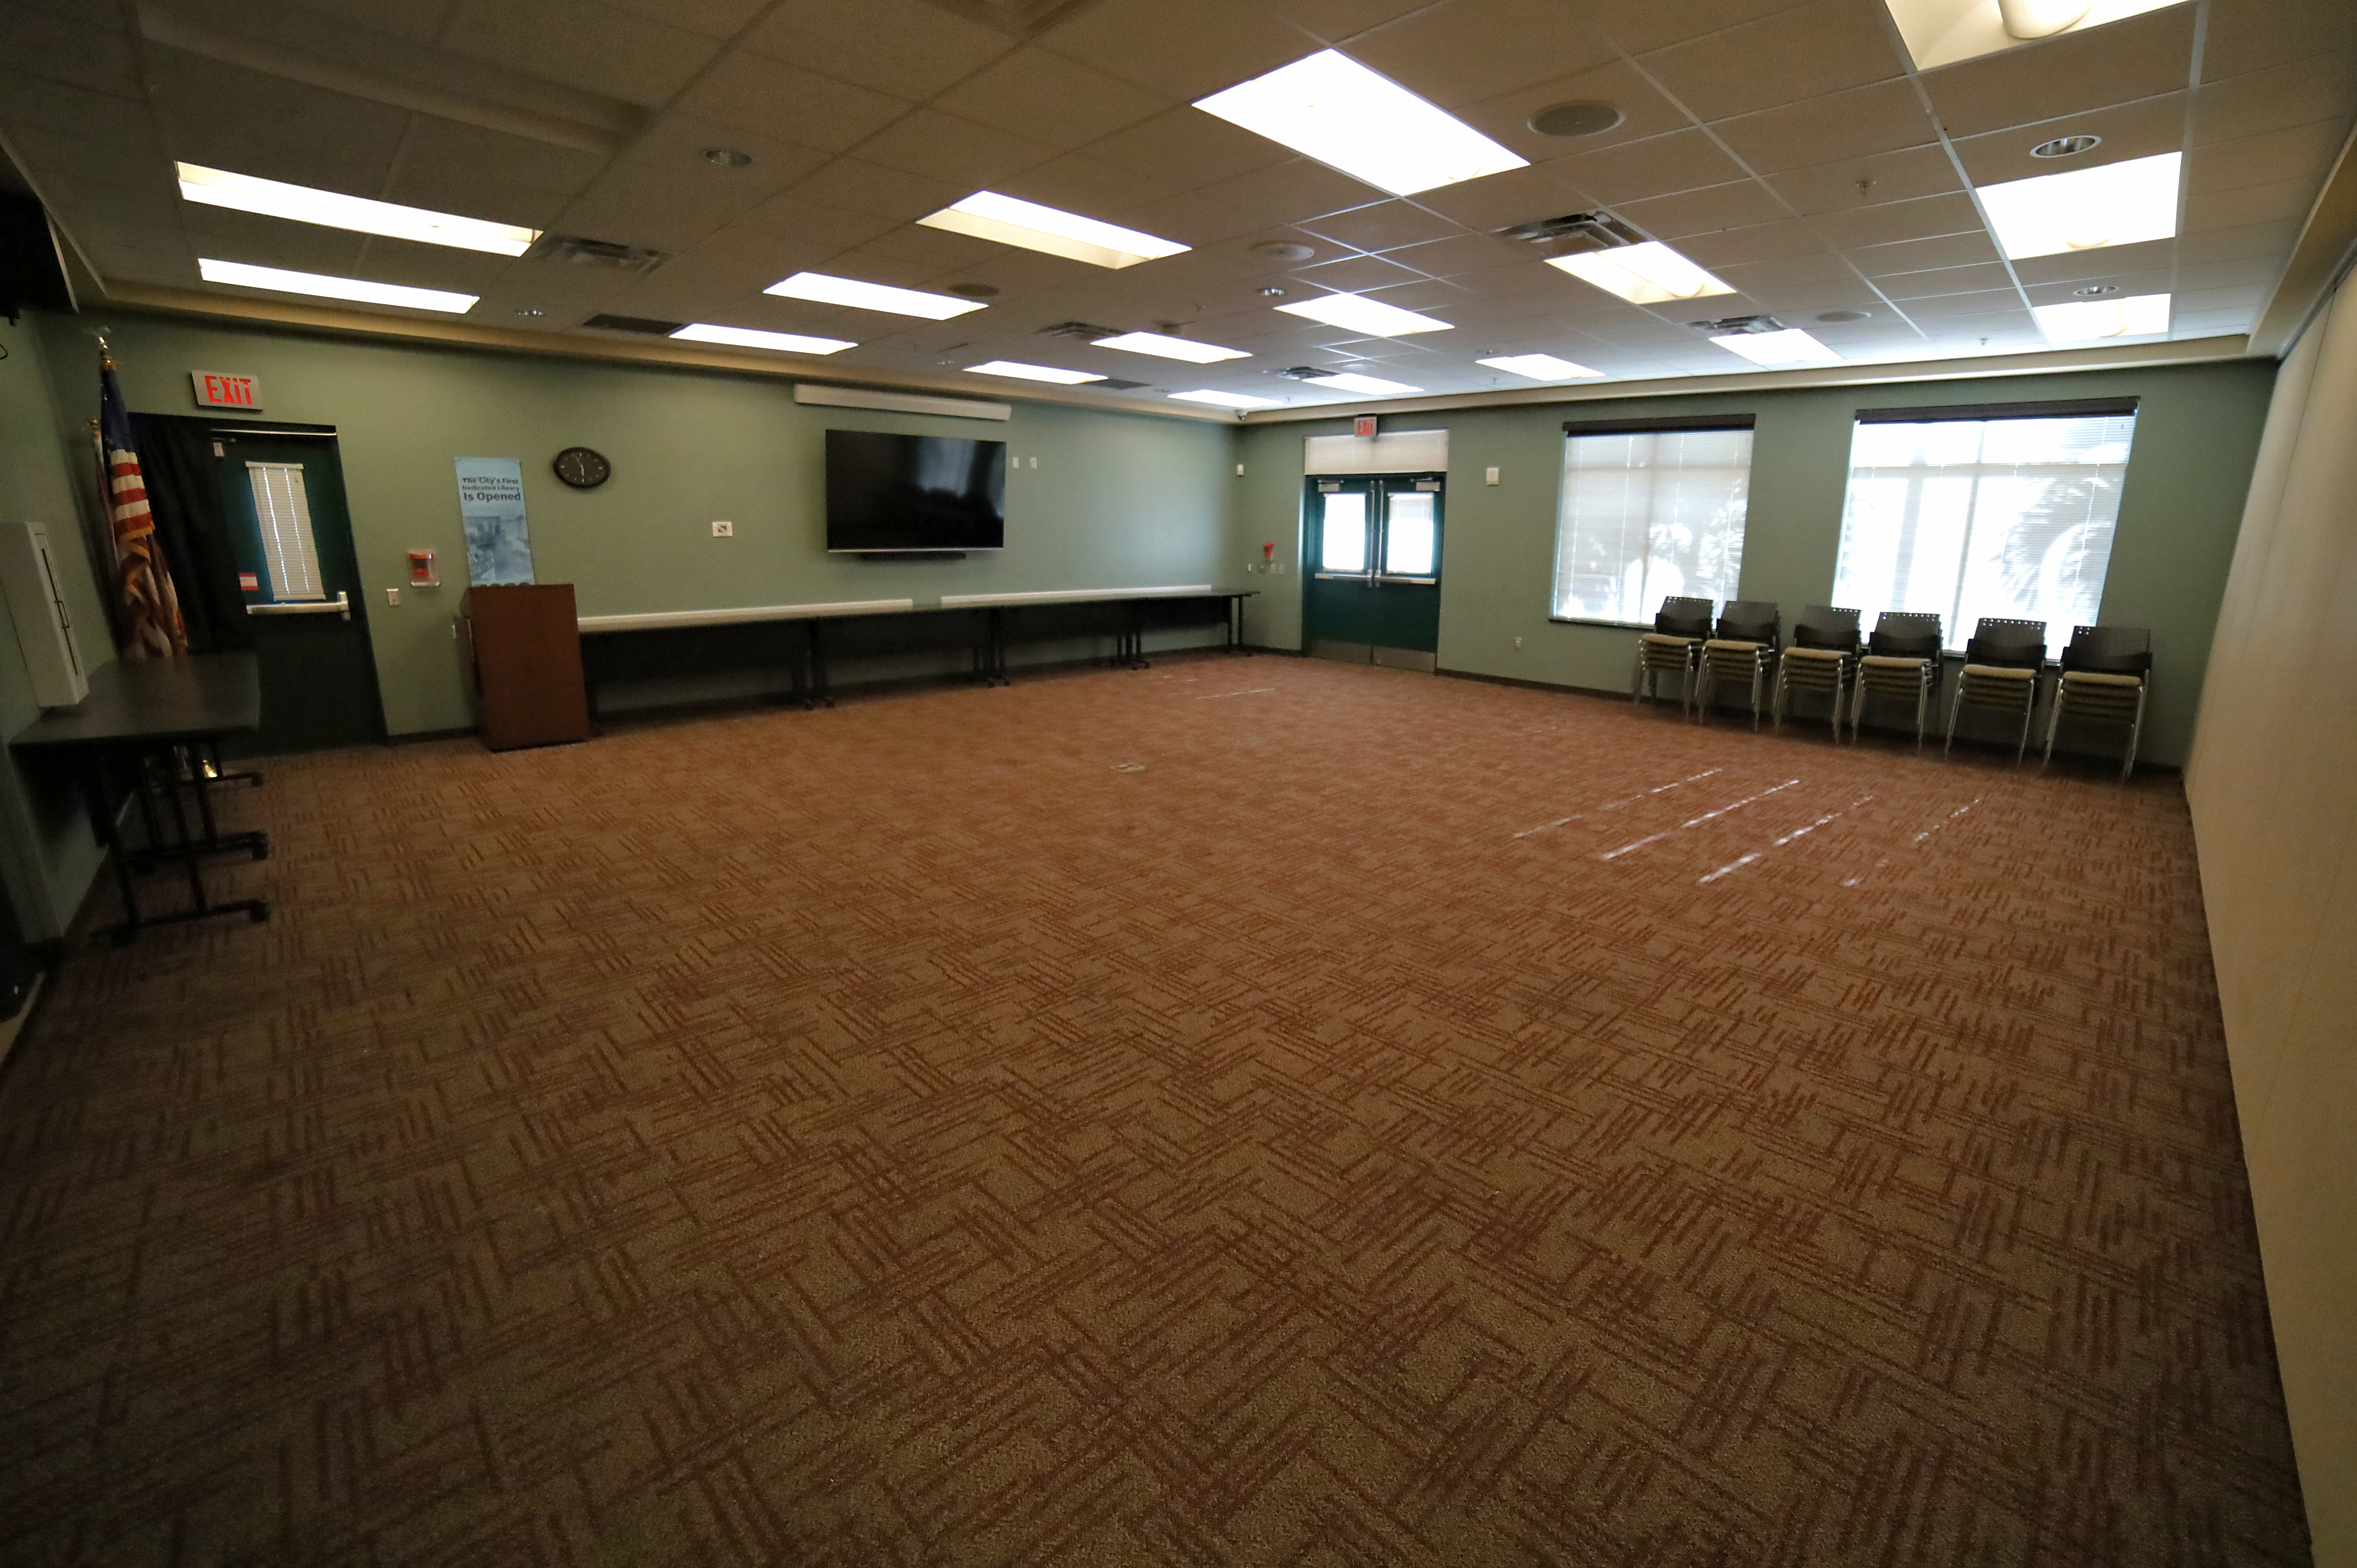 Interior shot of Meeting Room B showing an open room